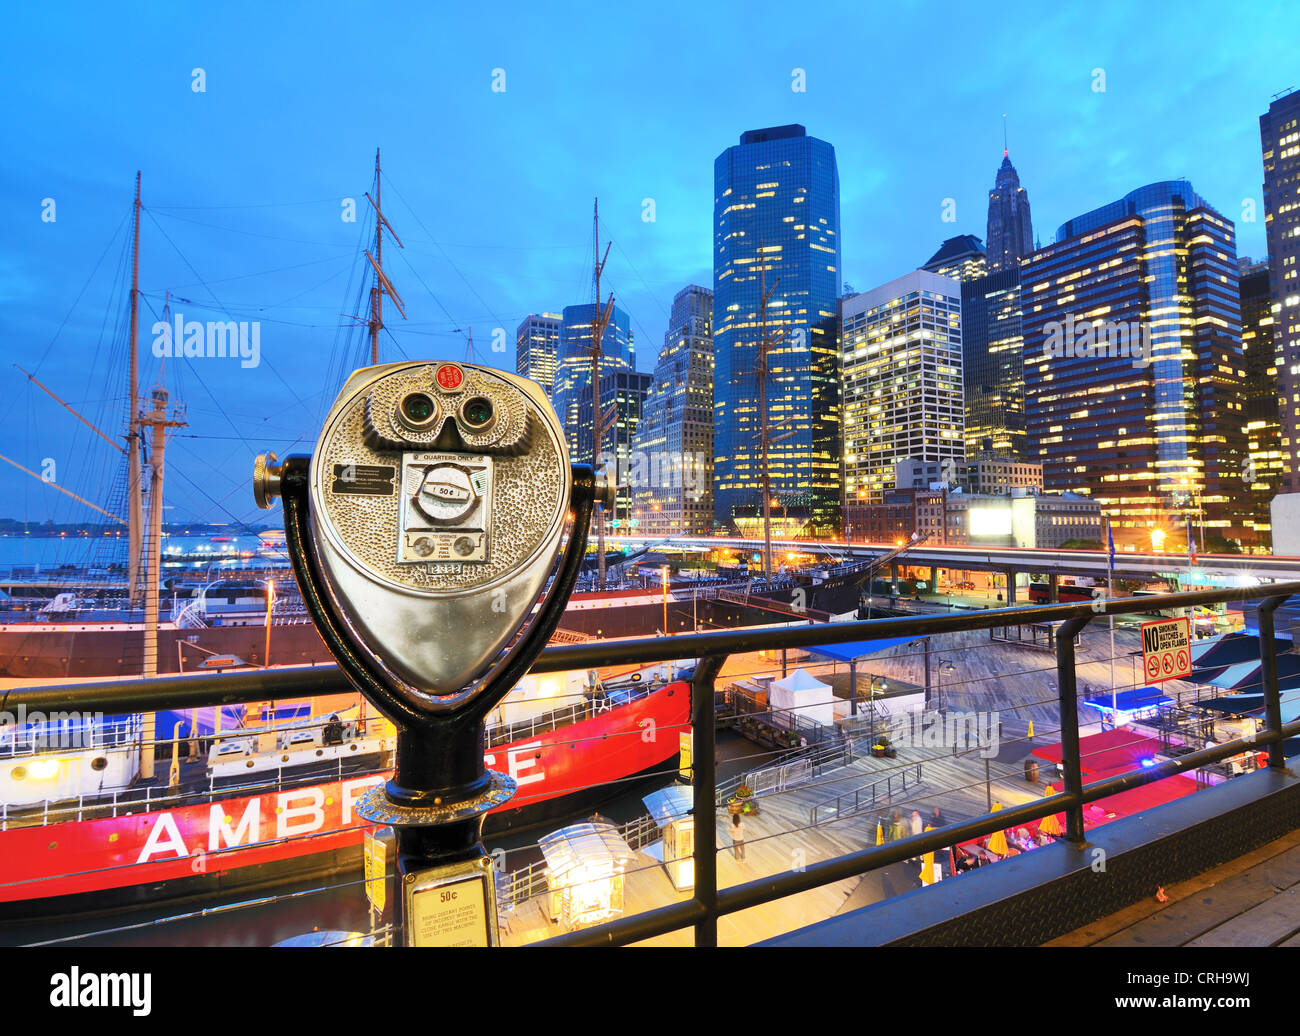 South Street Seaport in New York, New York, USA. Stock Photo